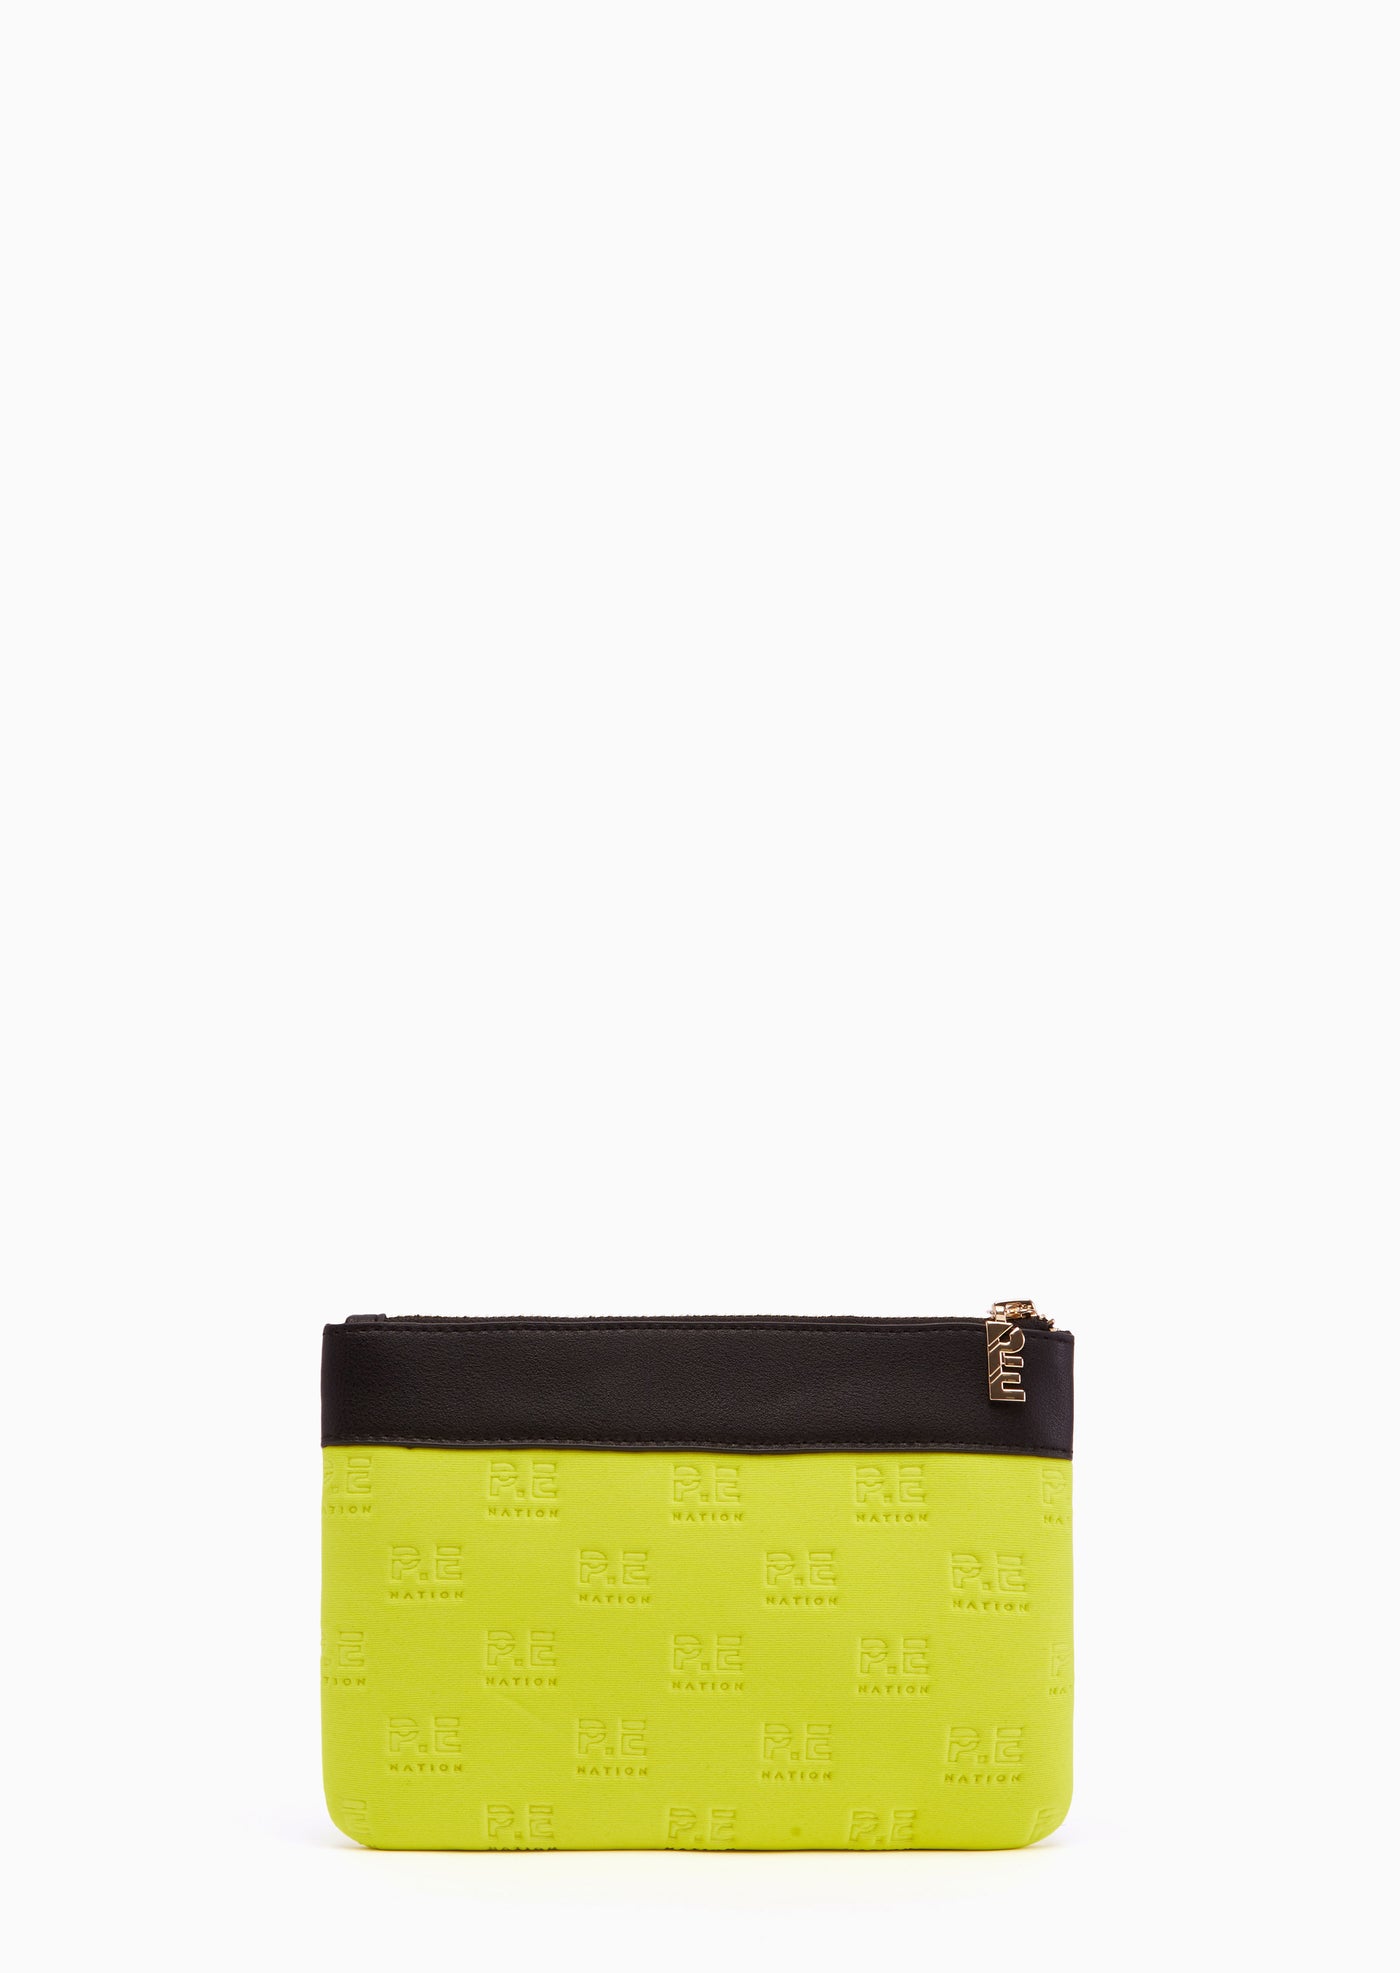 ULTIMATUM POUCH IN YELLOW